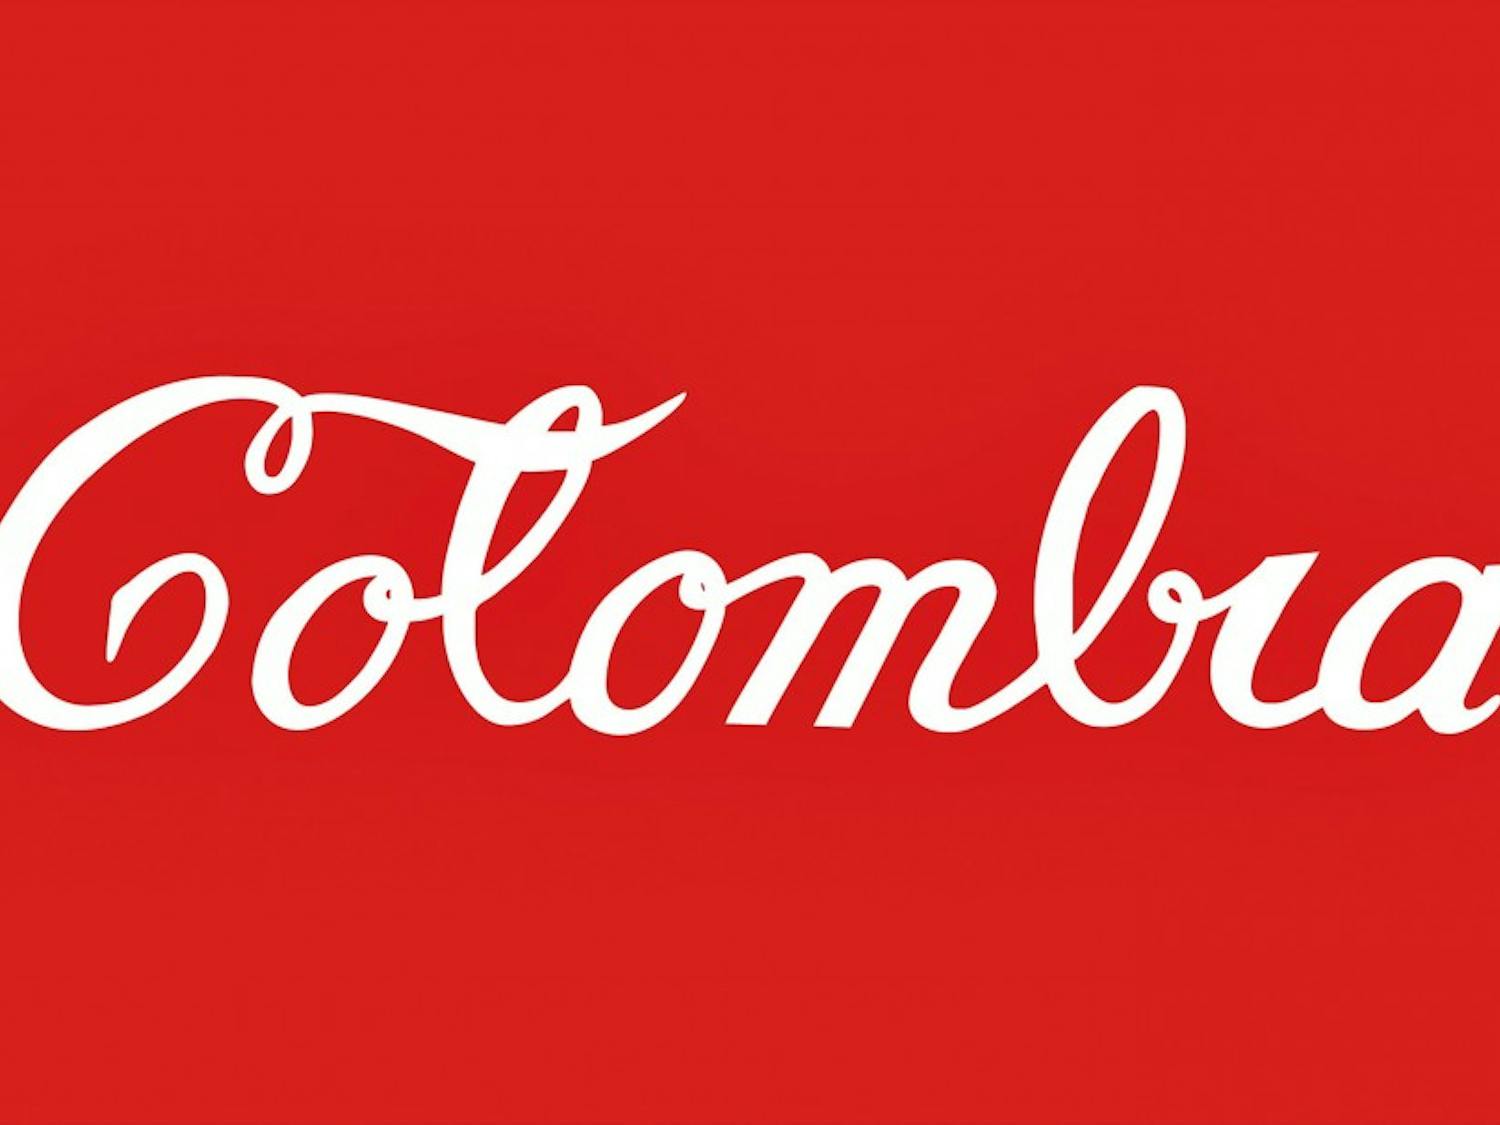 Antonio Caro's "Colombia Coca-Cola" (1976) will be featured in this semester "Pop América" exhibit at the Nasher.